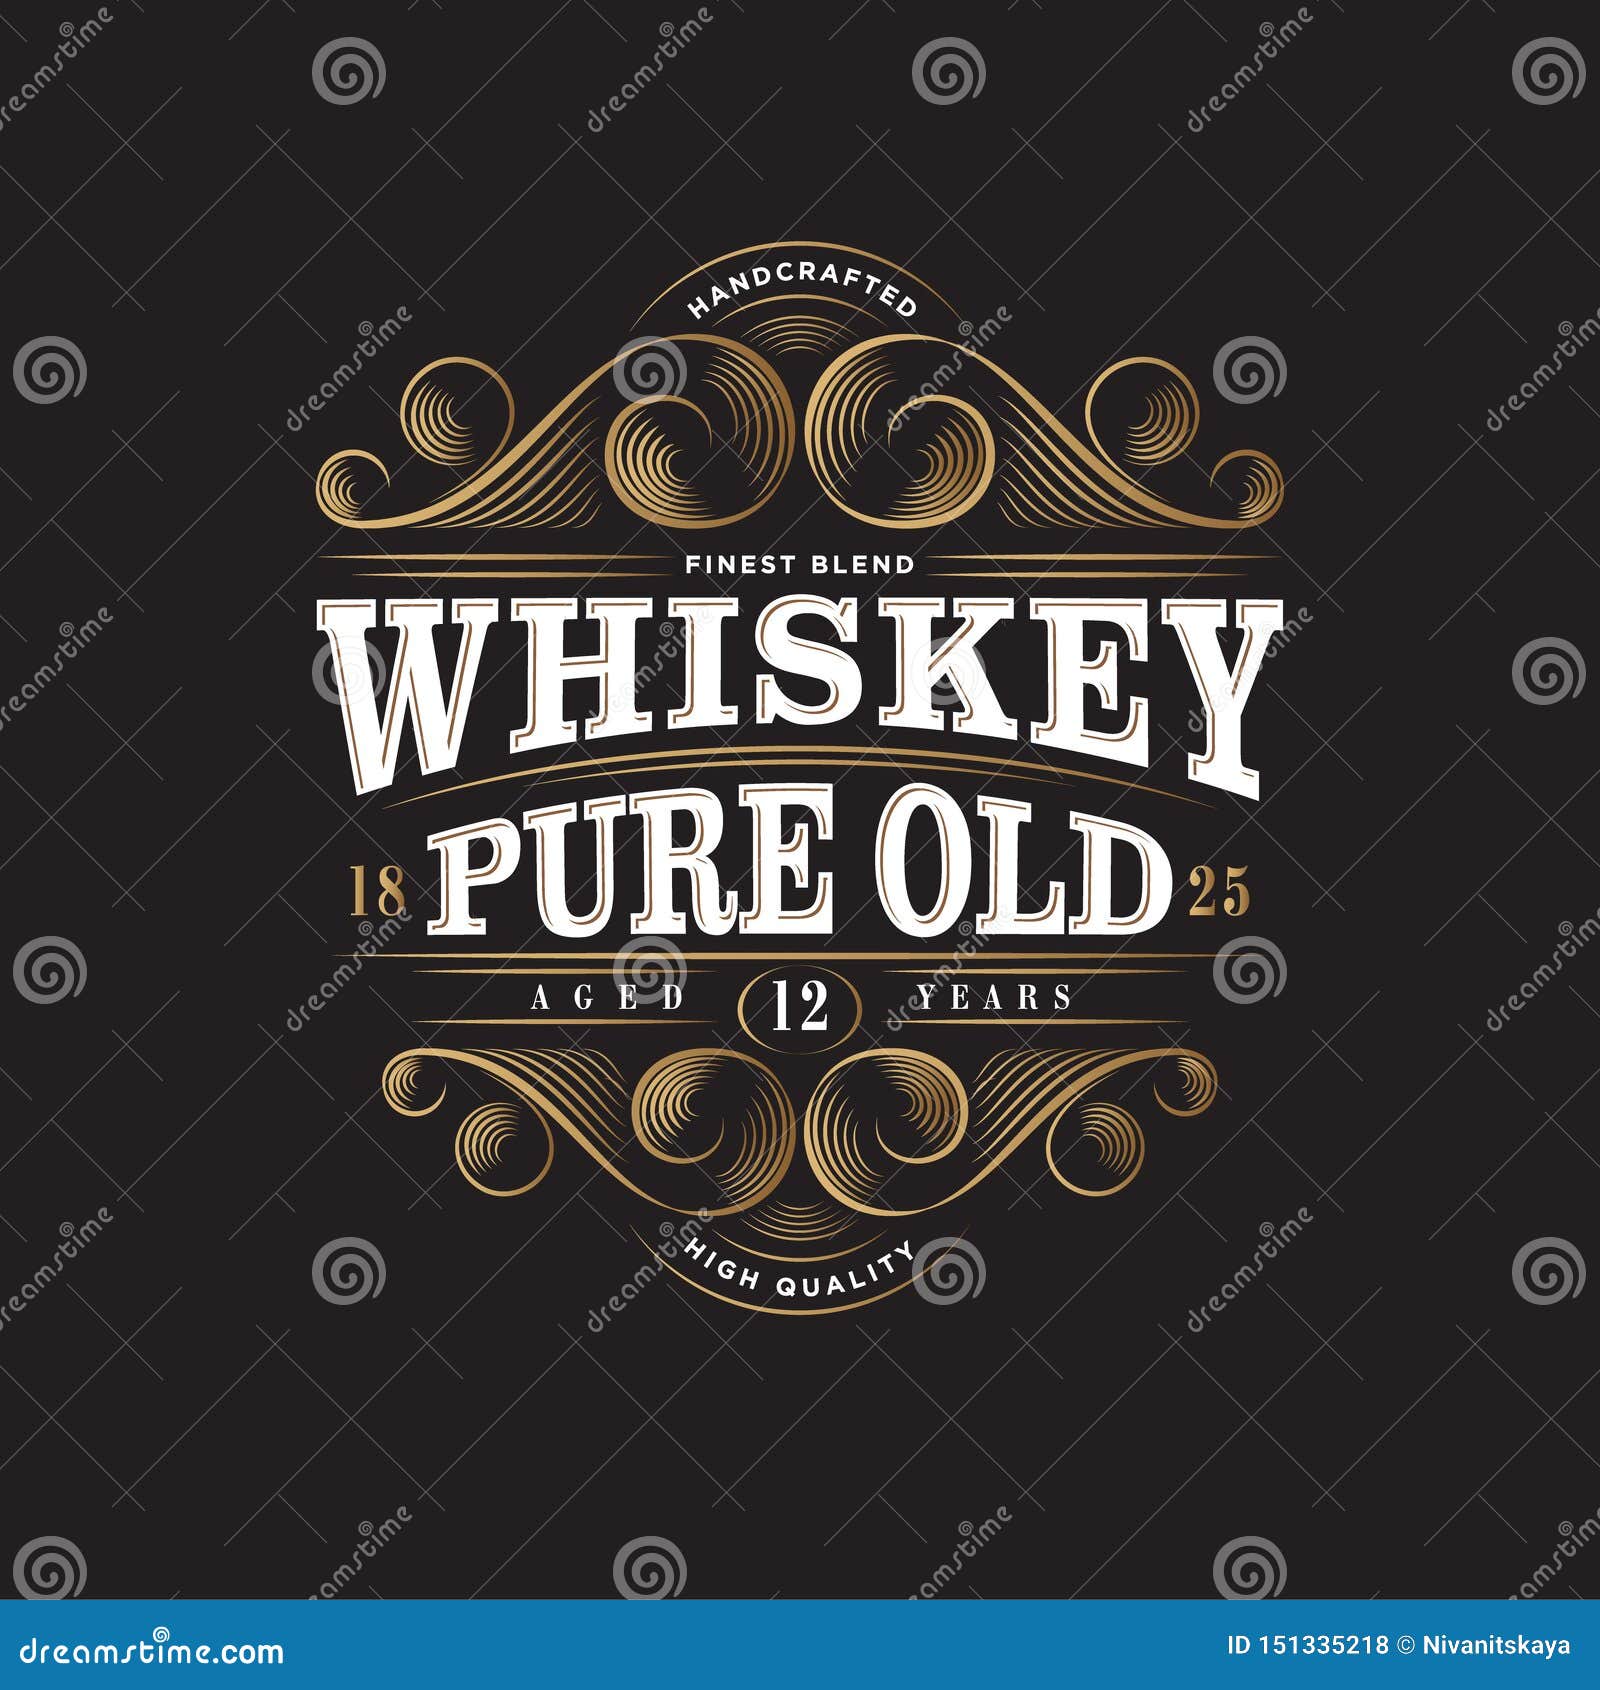 Whiskey Logo Whiskey Pure Old Label Premium Packaging Design